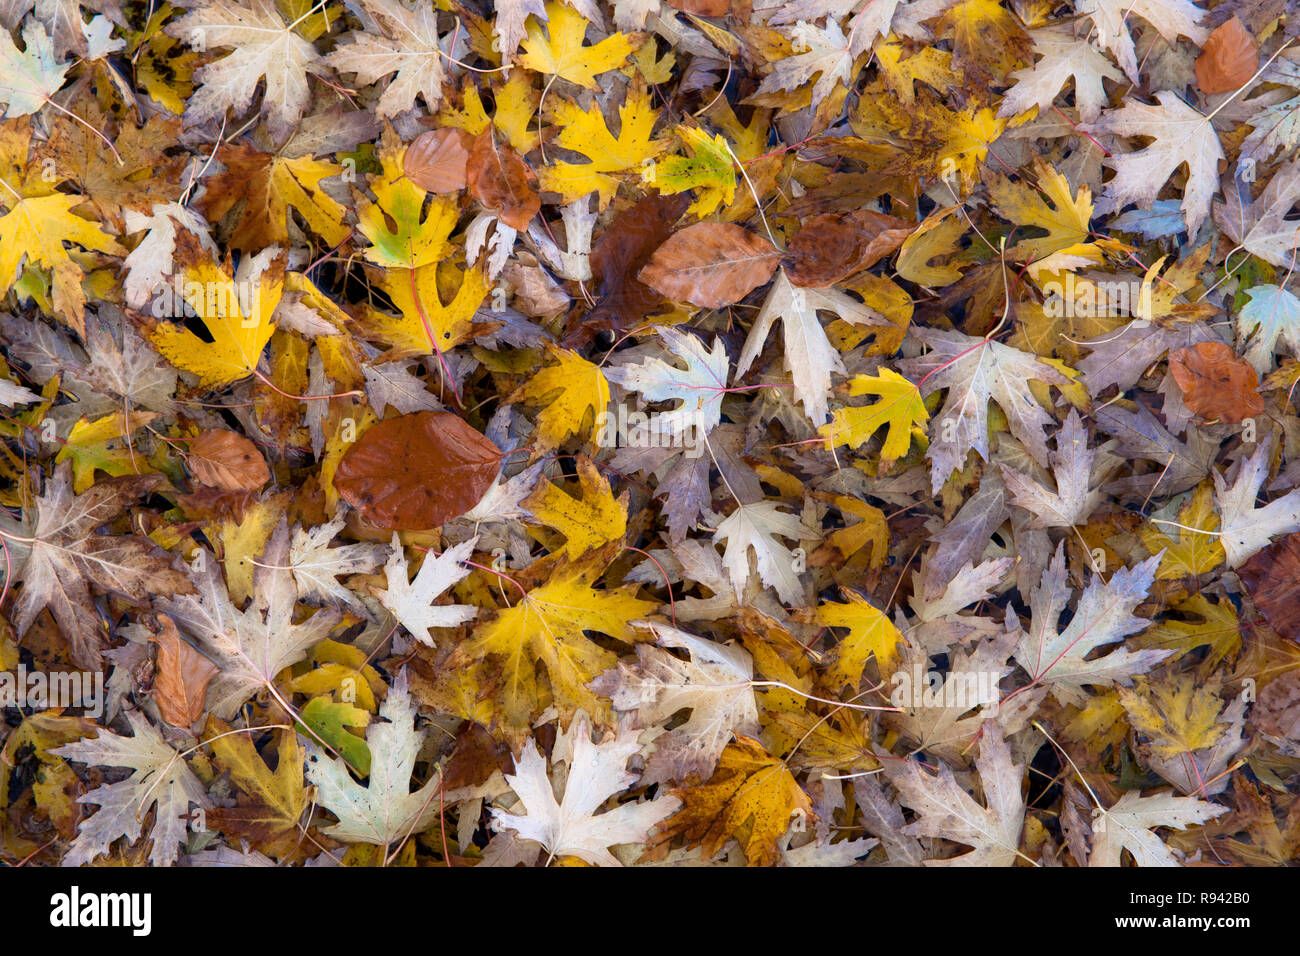 Maple (lat. Acer) autumn foliage, leaves.  Ahorn (lat. Acer) Herbstlaub, Blaetter. Stock Photo